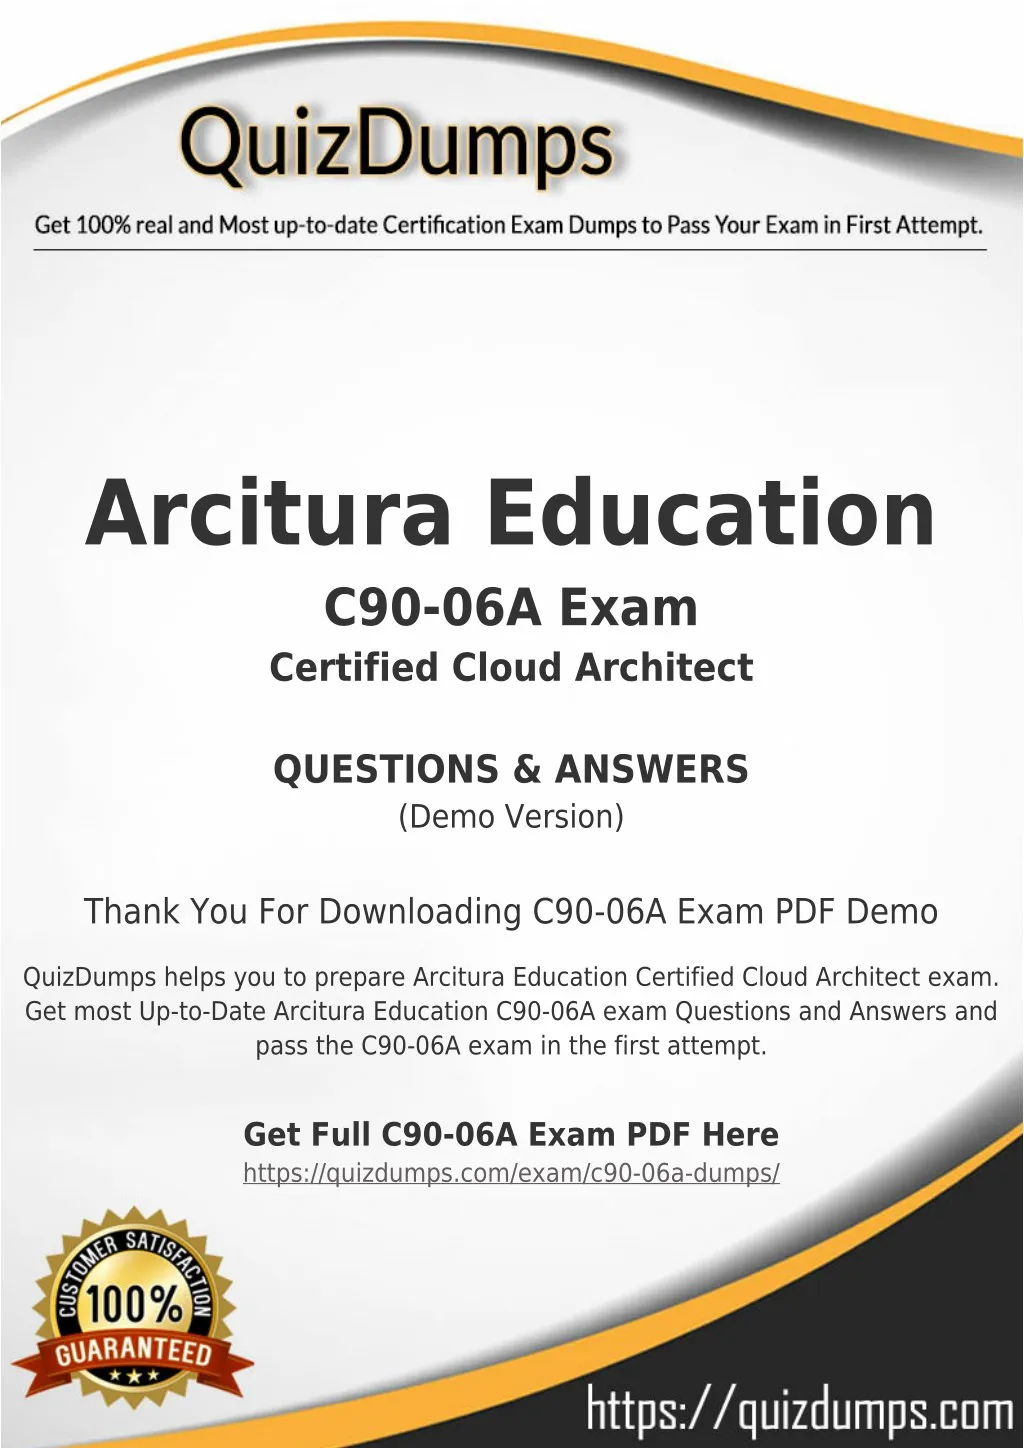 arcitura education c90 06a exam certified cloud